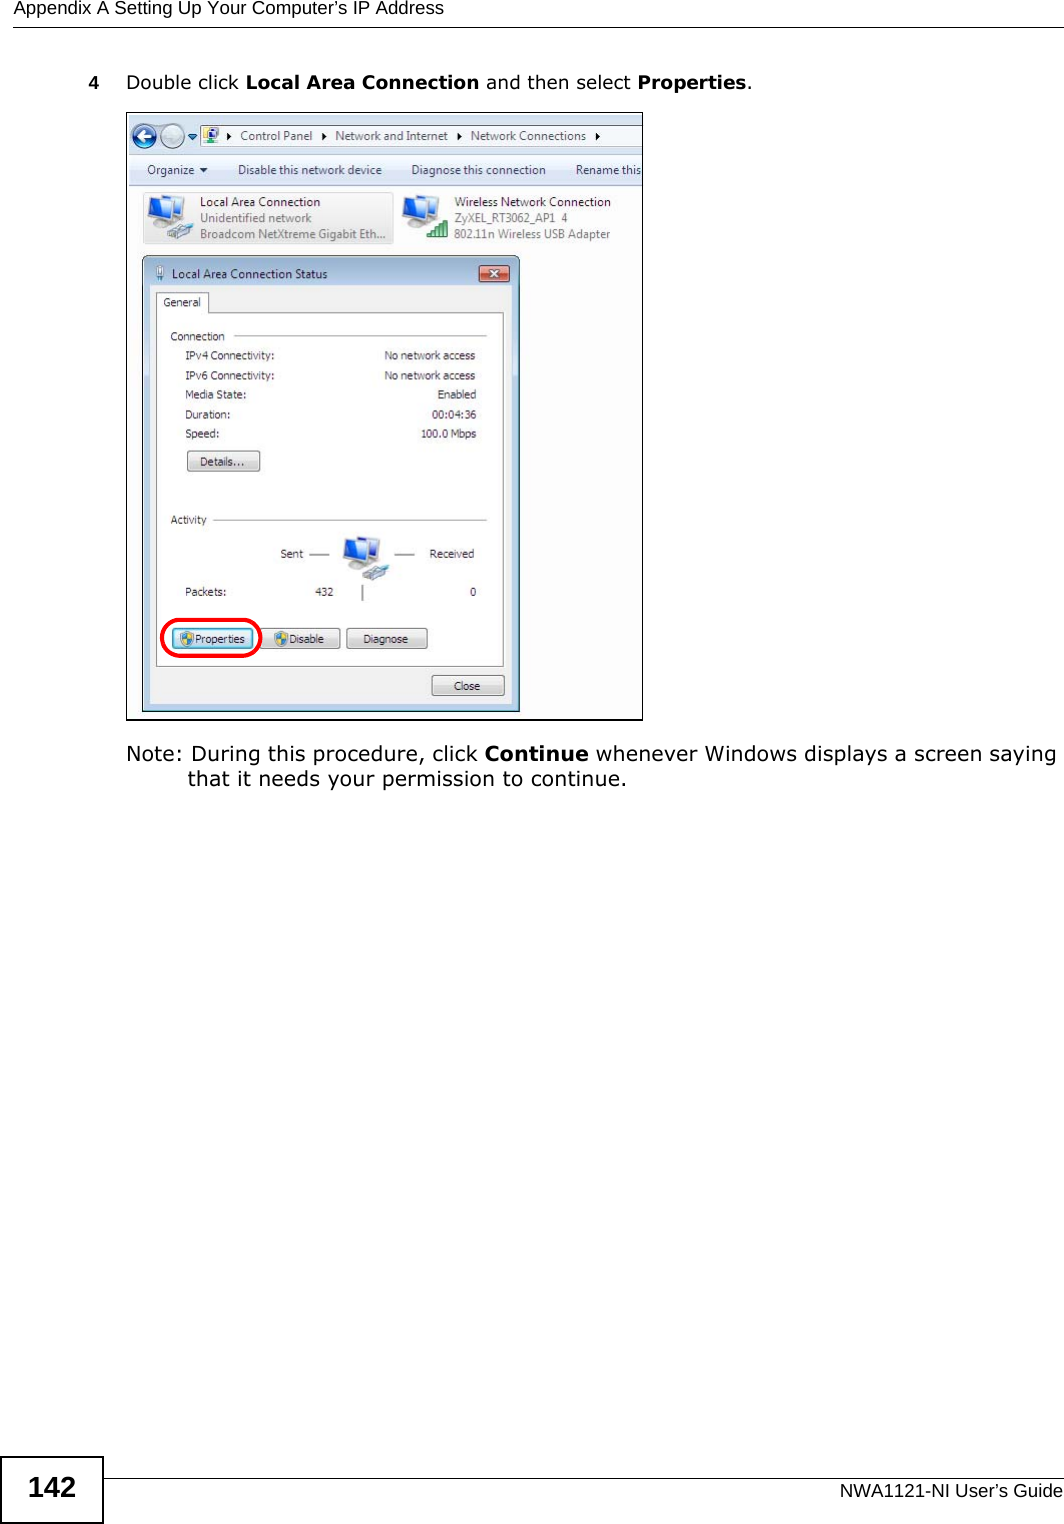 Appendix A Setting Up Your Computer’s IP AddressNWA1121-NI User’s Guide1424Double click Local Area Connection and then select Properties.Note: During this procedure, click Continue whenever Windows displays a screen saying that it needs your permission to continue.